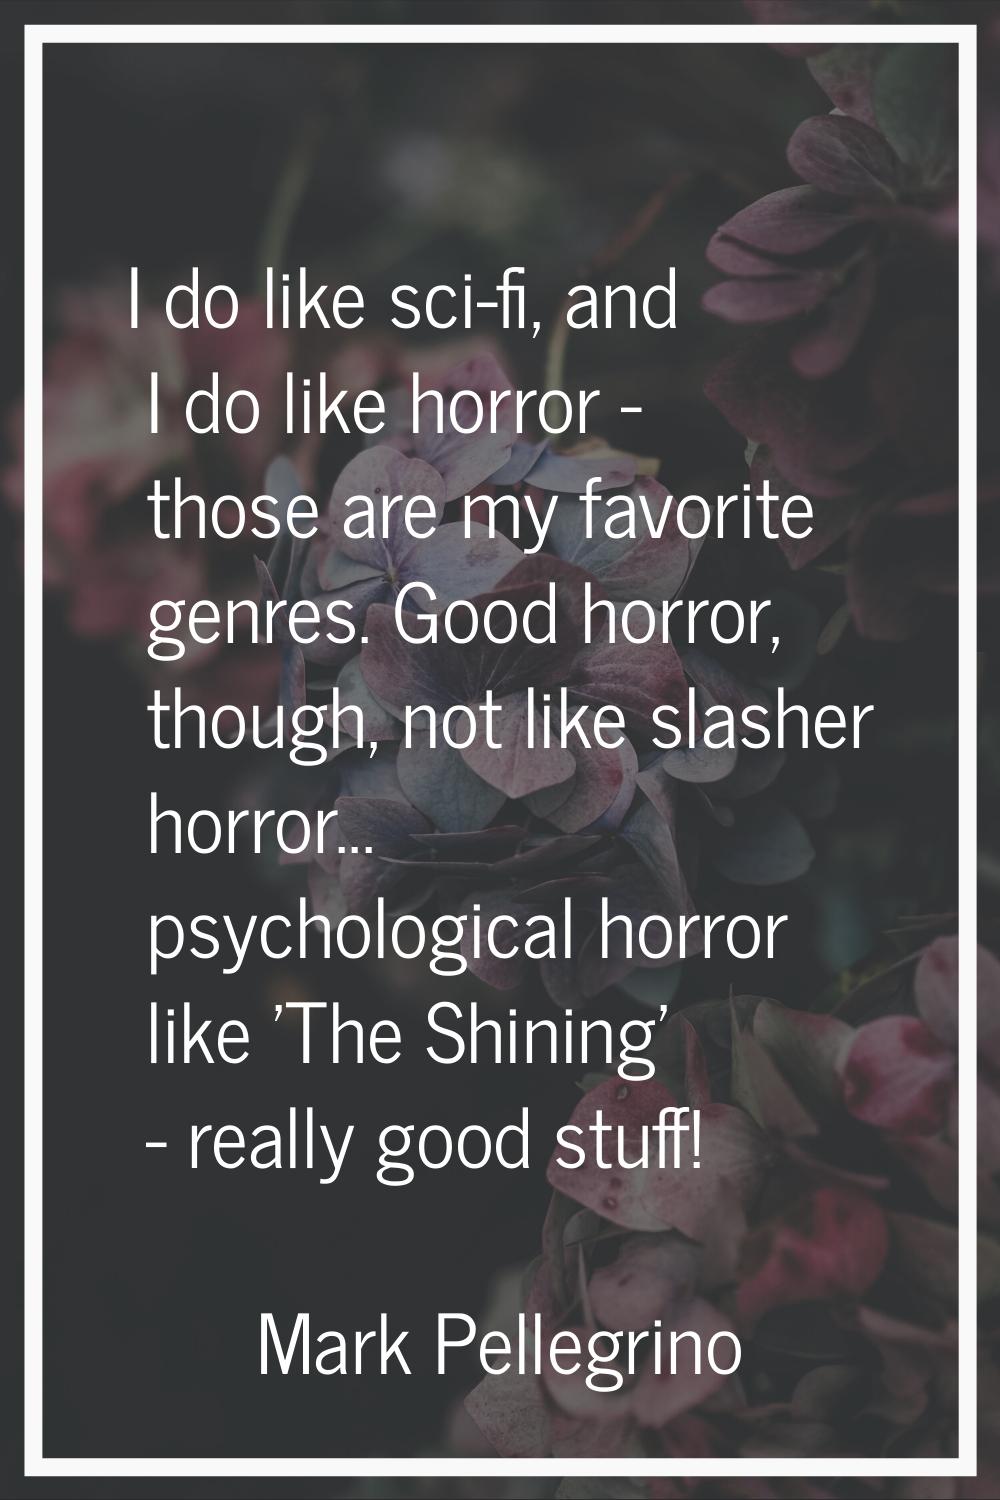 I do like sci-fi, and I do like horror - those are my favorite genres. Good horror, though, not lik